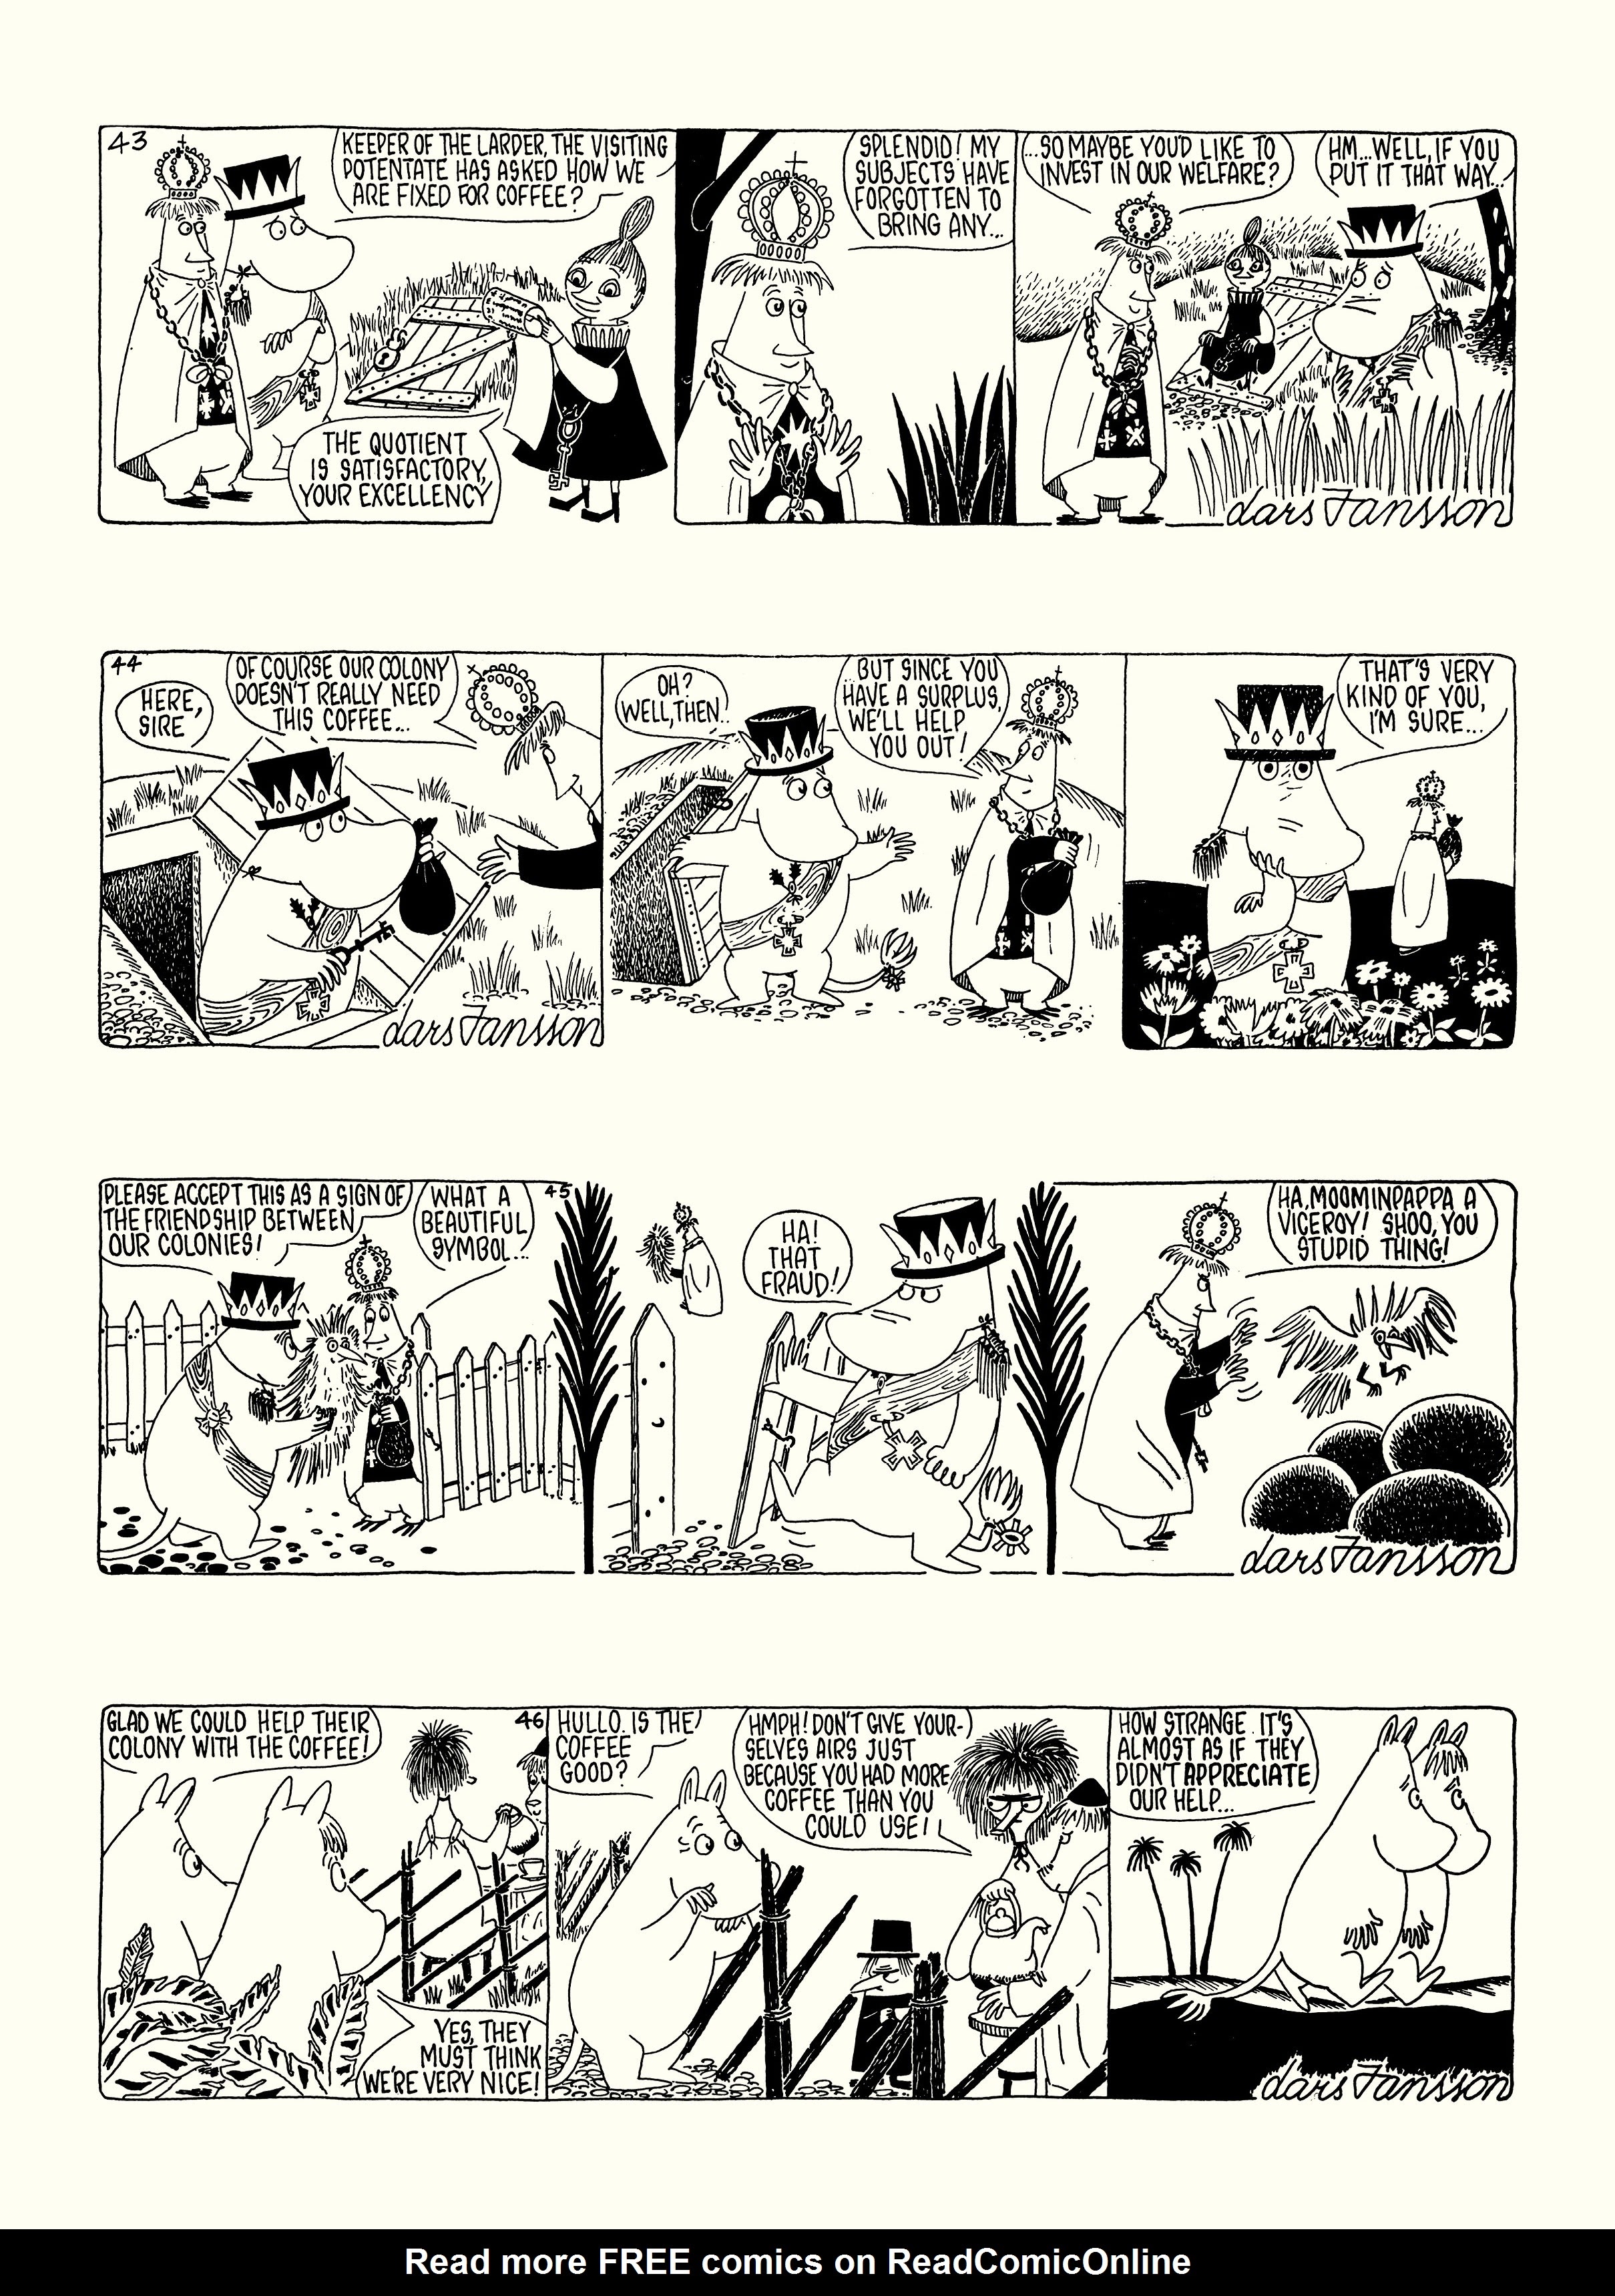 Read online Moomin: The Complete Lars Jansson Comic Strip comic -  Issue # TPB 7 - 17